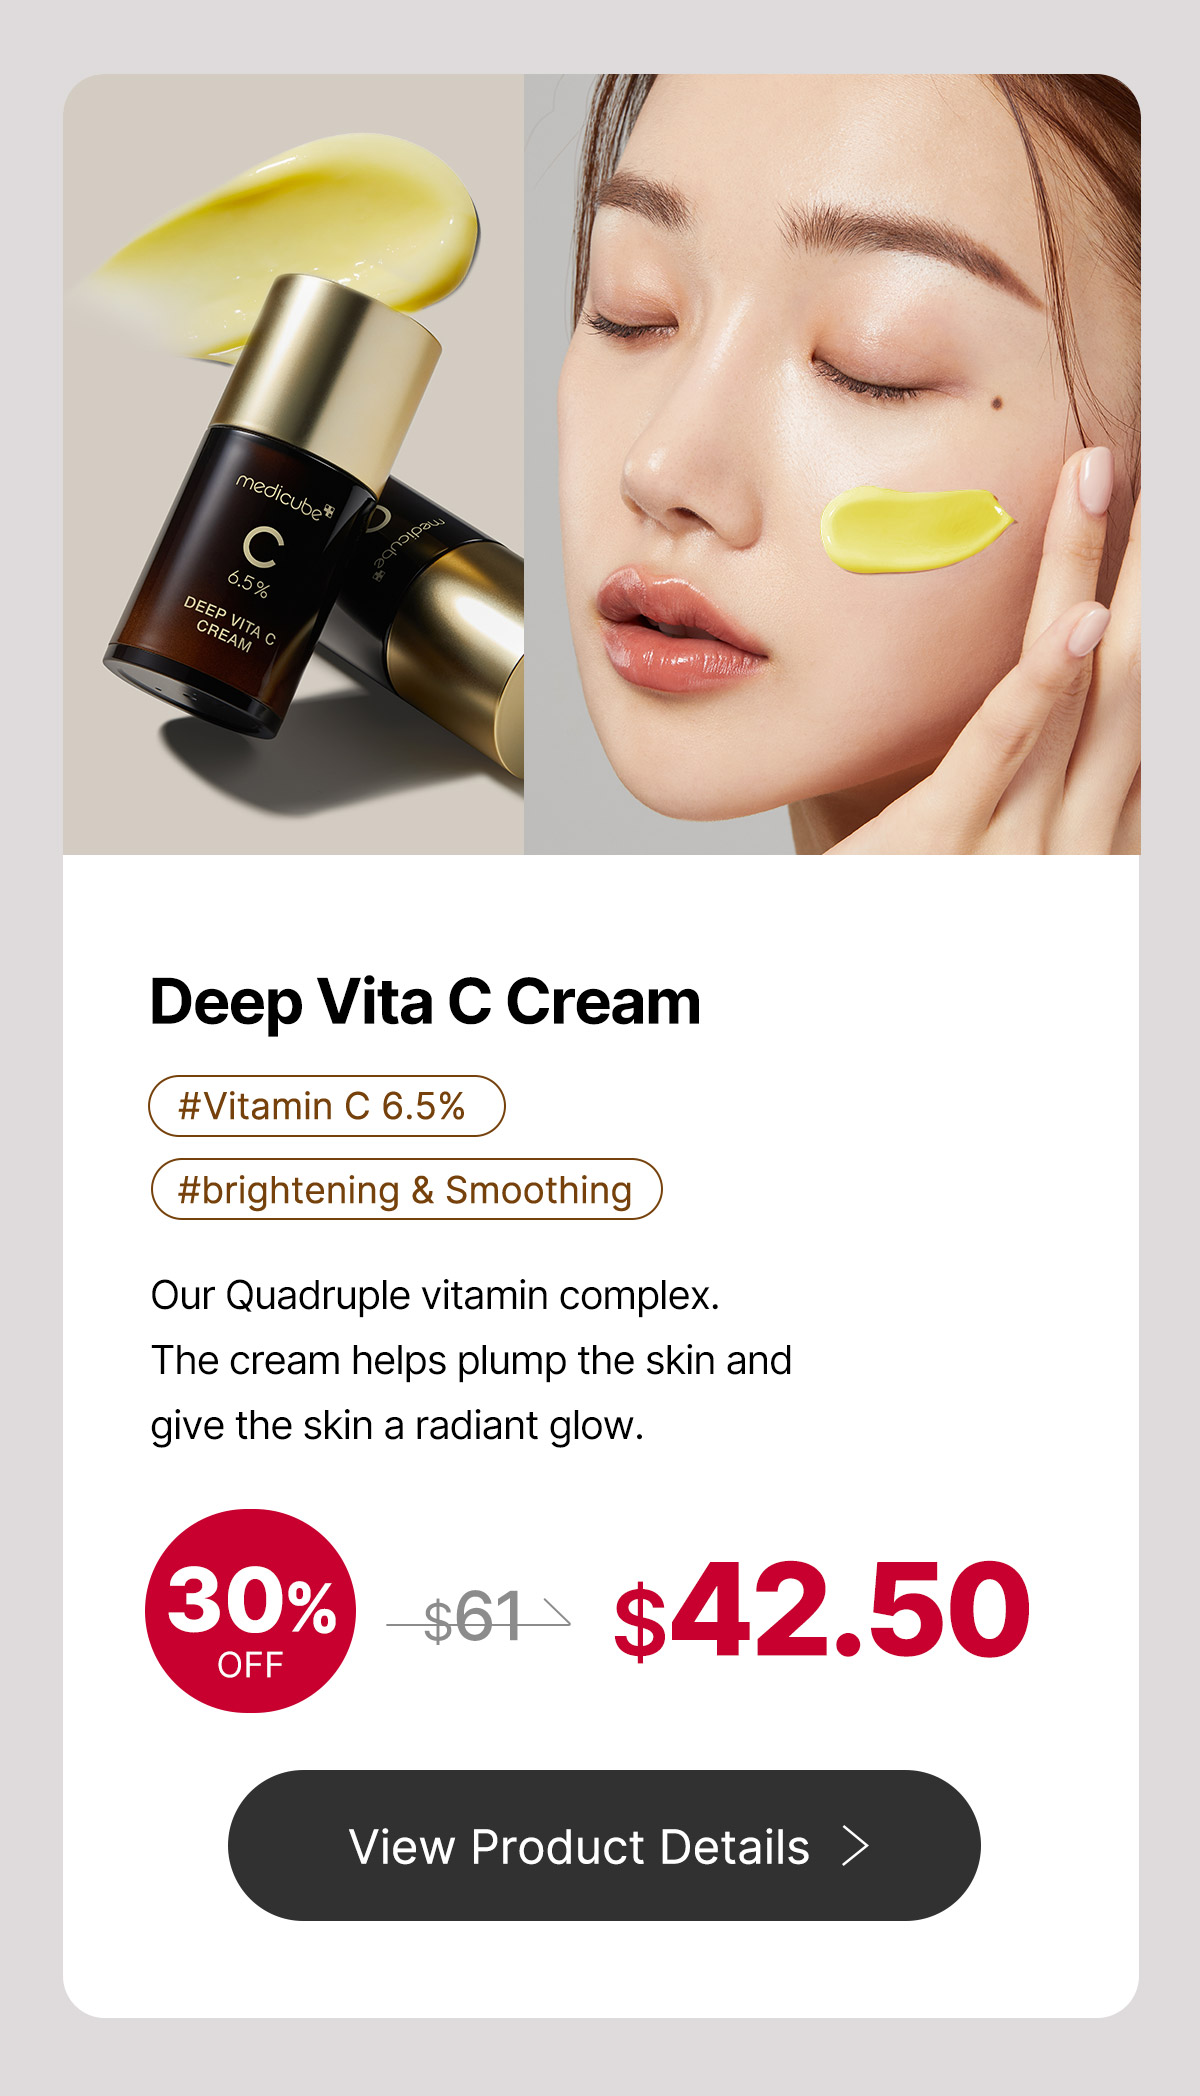  Deep Vita C Cream #Vitamin C 6.5% #brightening Smoothing Our Quadruple vitamin complex. The cream helps plump the skin and give the skin a radiant glow. s61- $42.90 View Product Details 